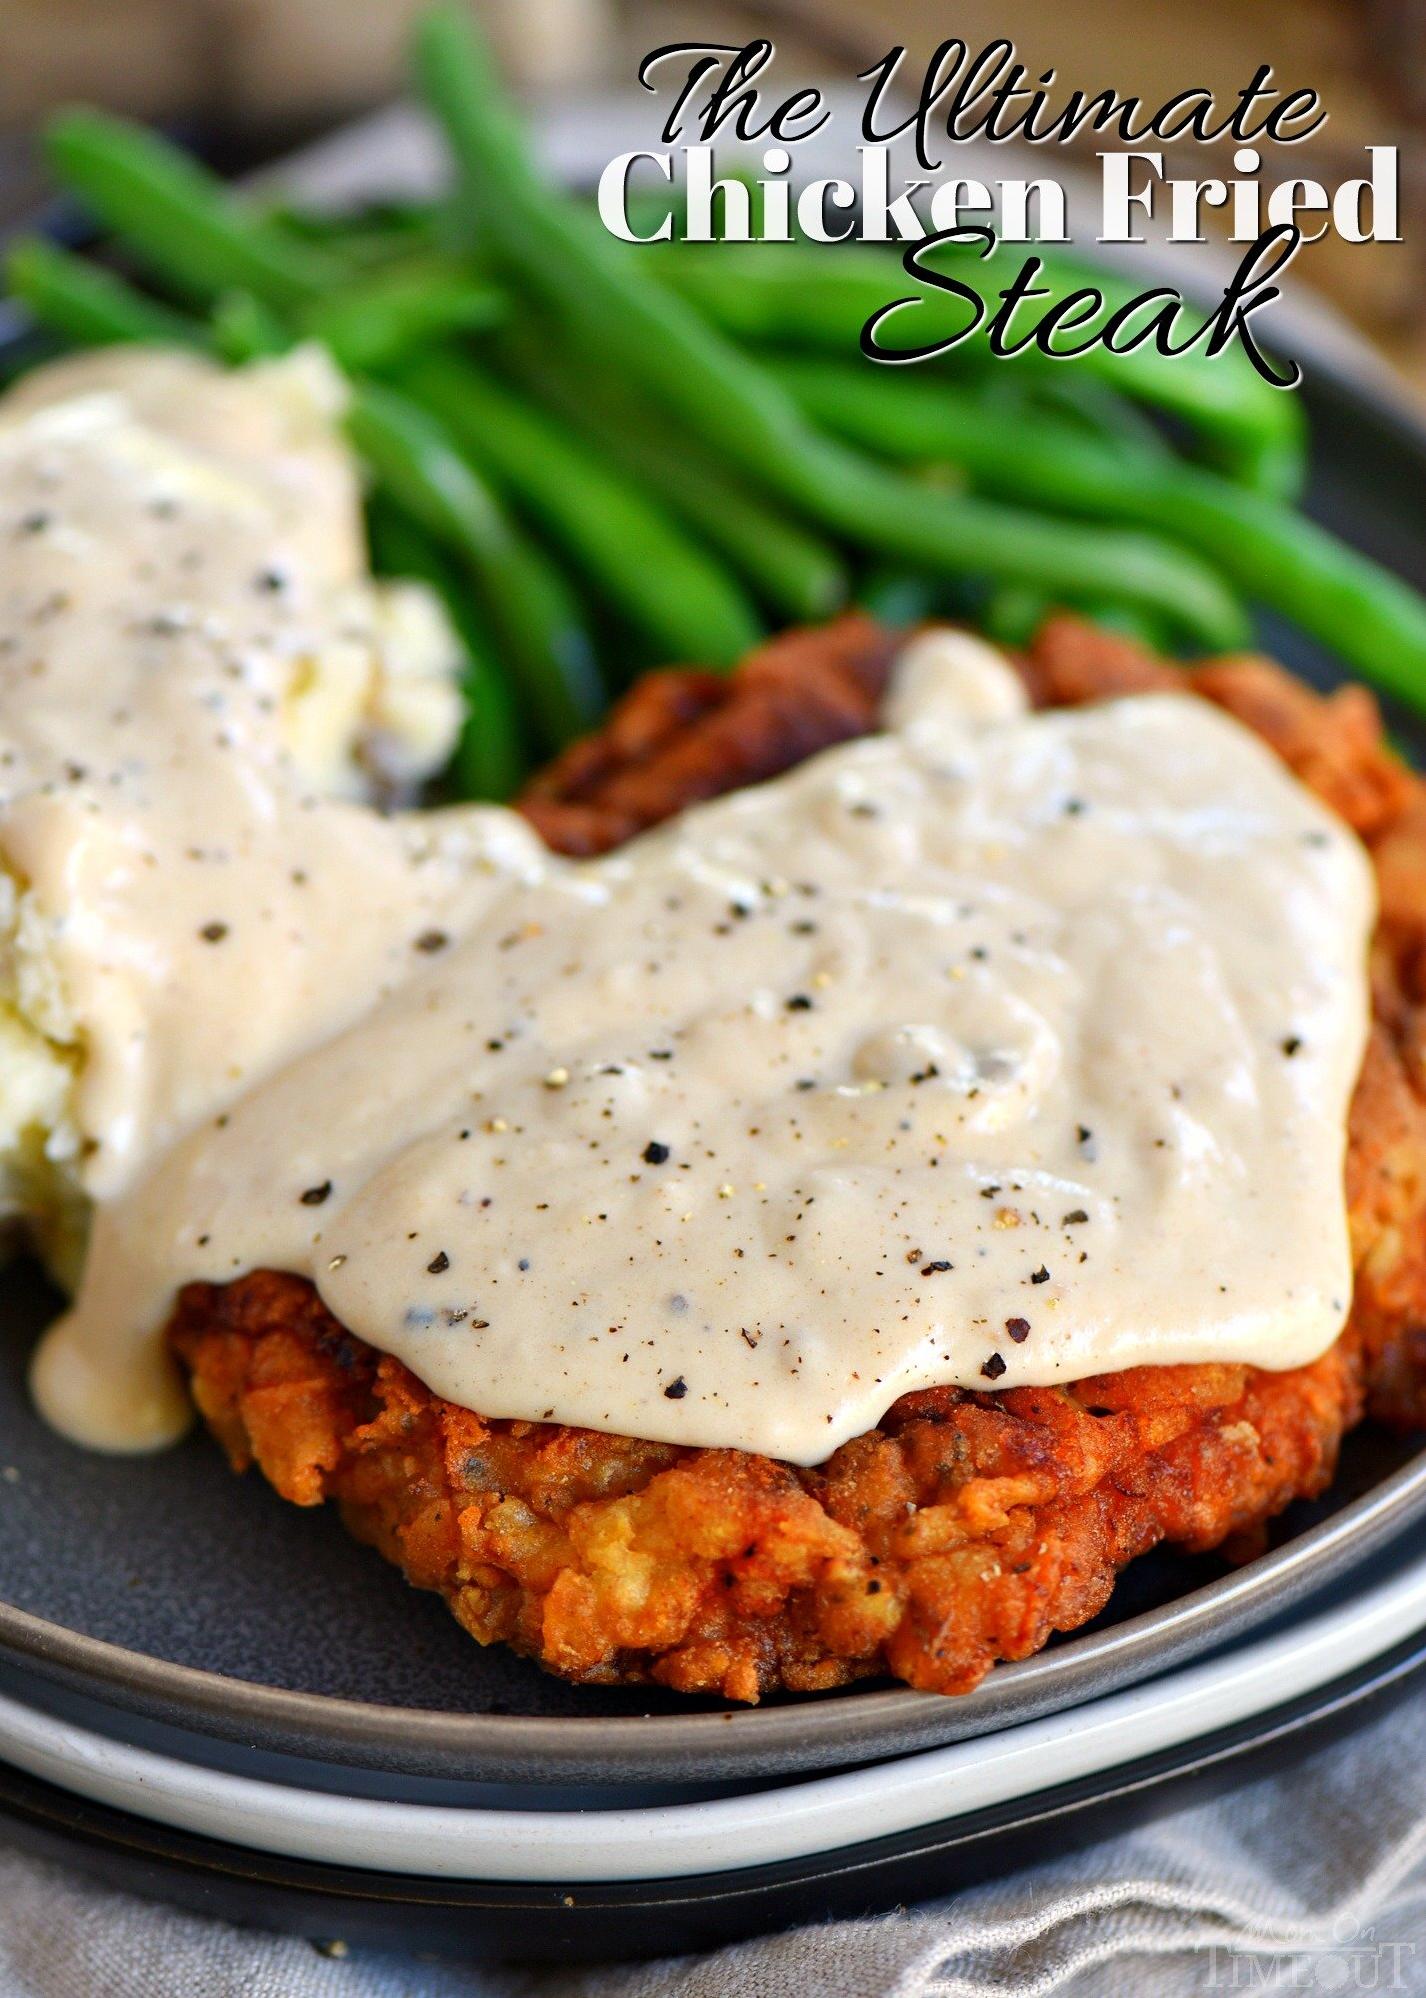  Don't let the name fool you - this So Southern Chicken-Fried Steak is fit for all!